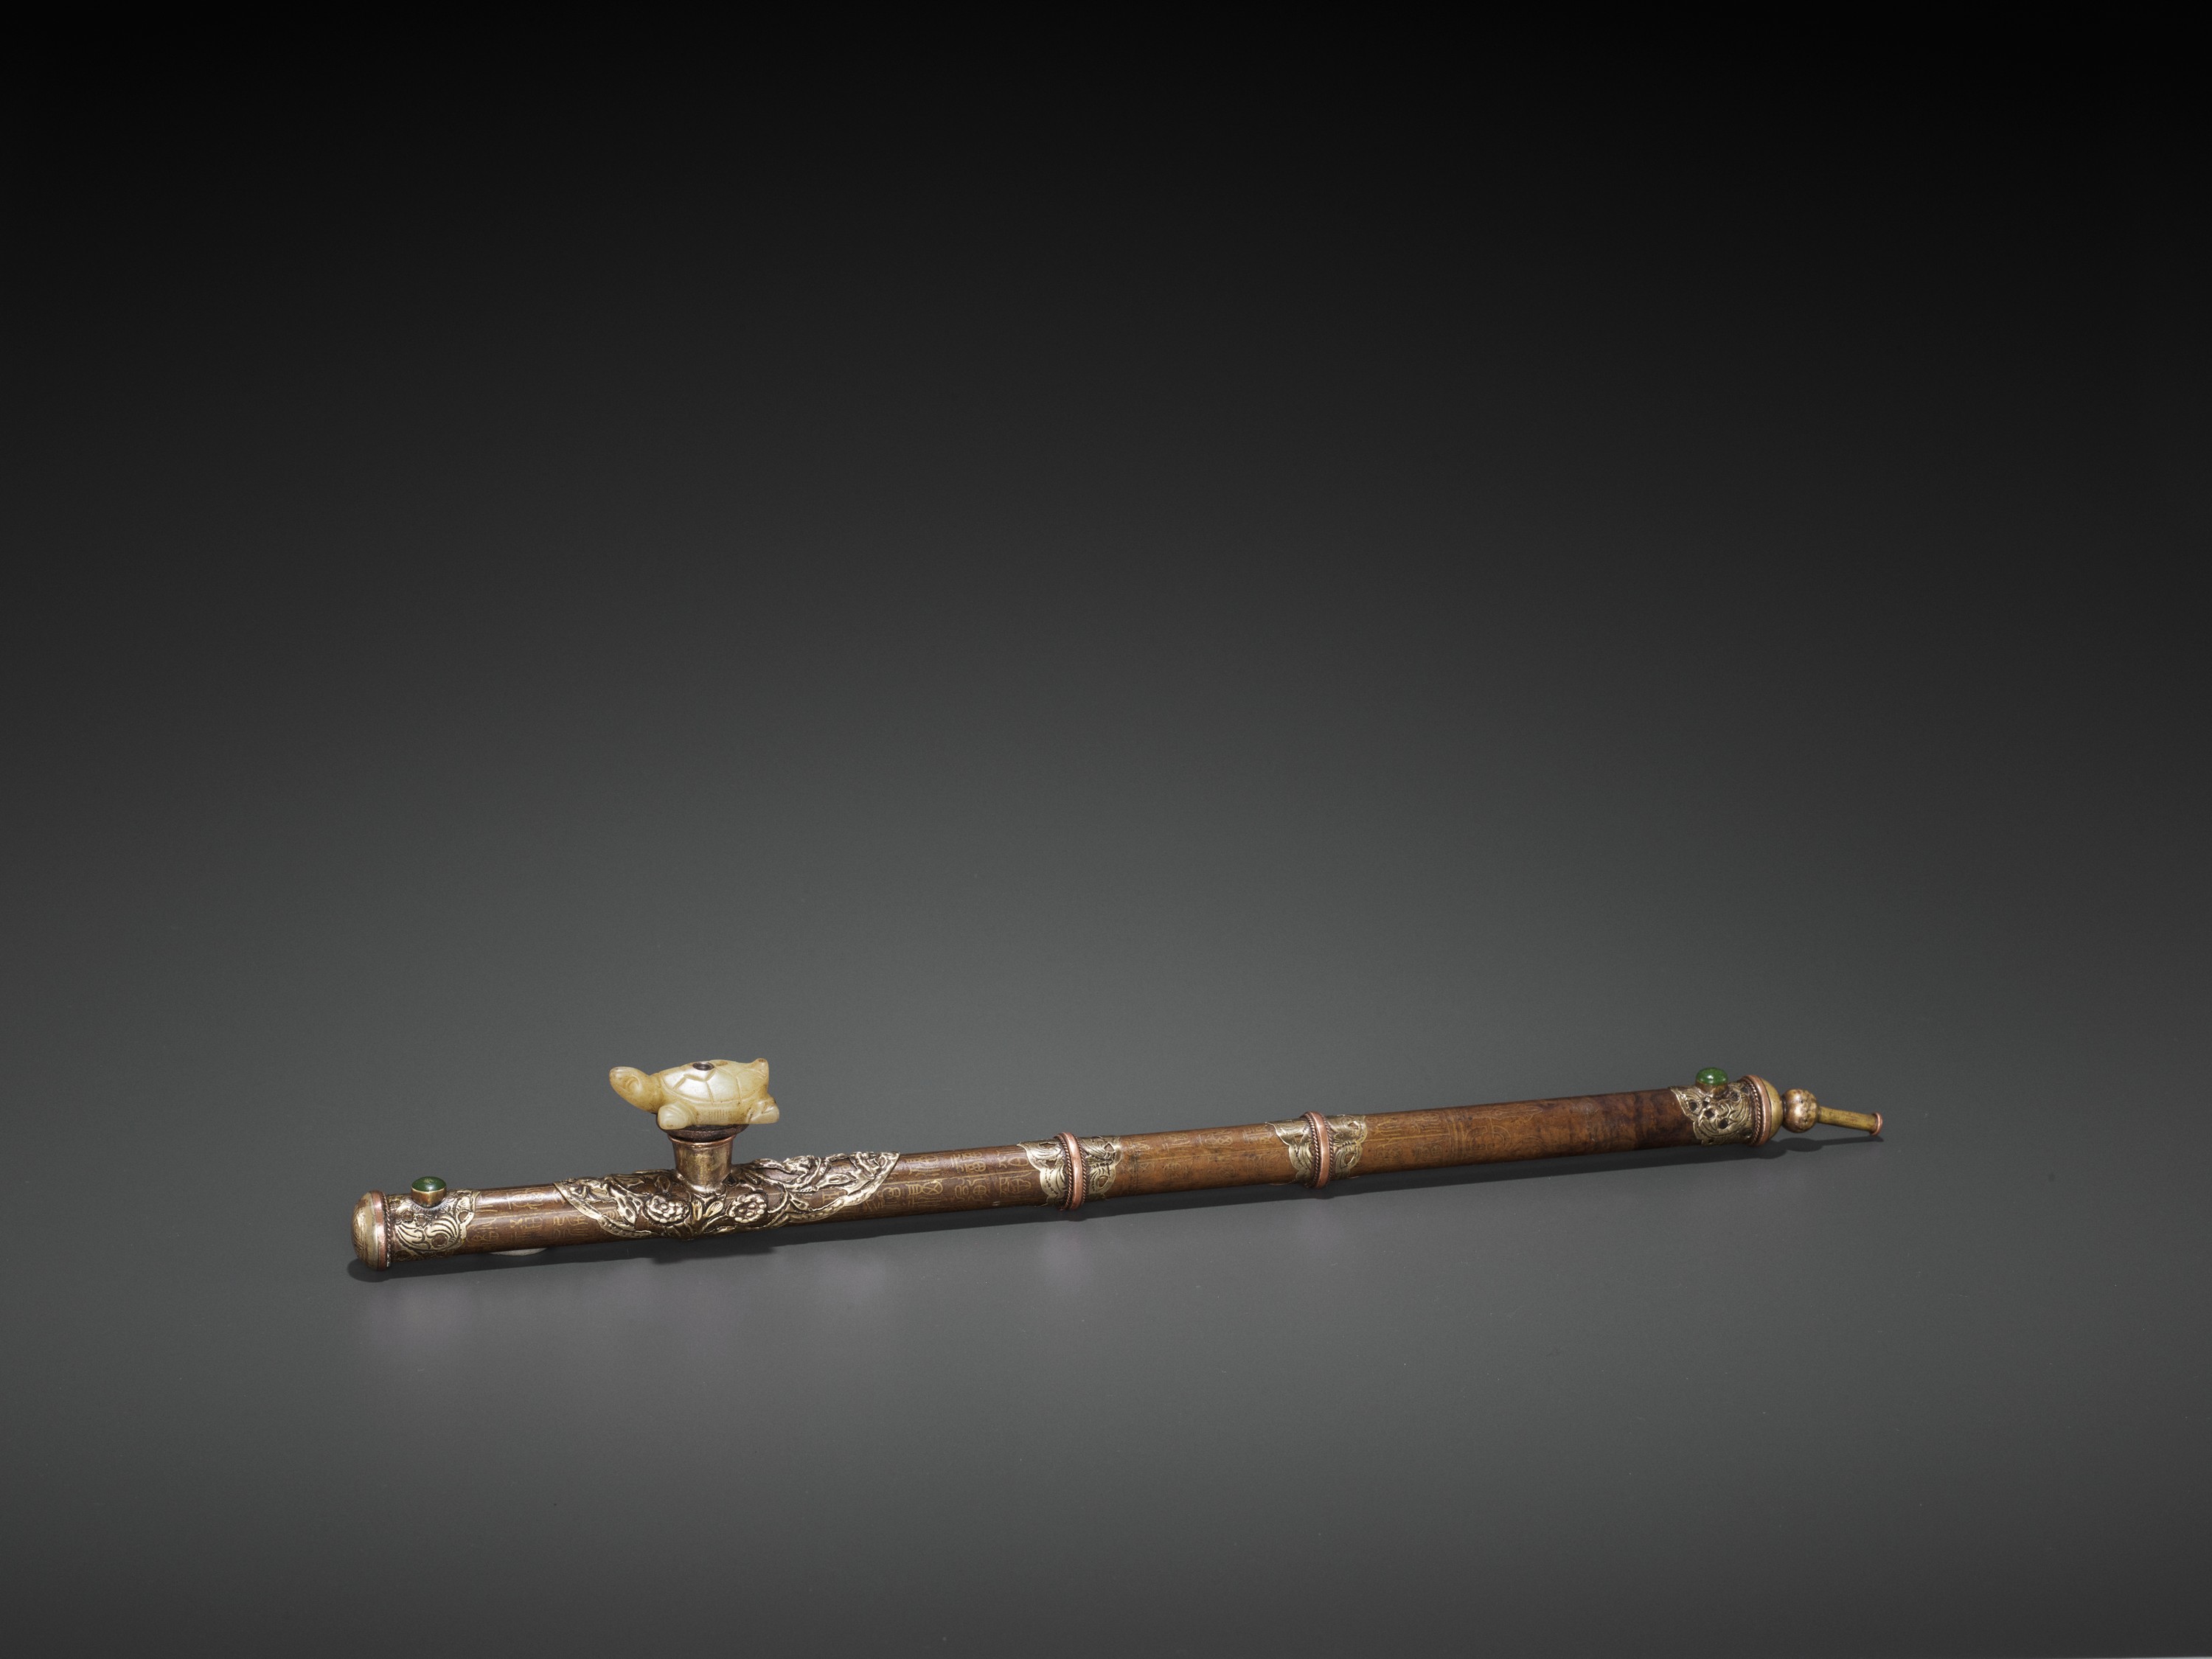 AN INSCRIBED BRONZE OPIUM PIPE WITH SILVER AND COPPER FITTINGS, LATE QING TO REPUBLIC - Image 2 of 8